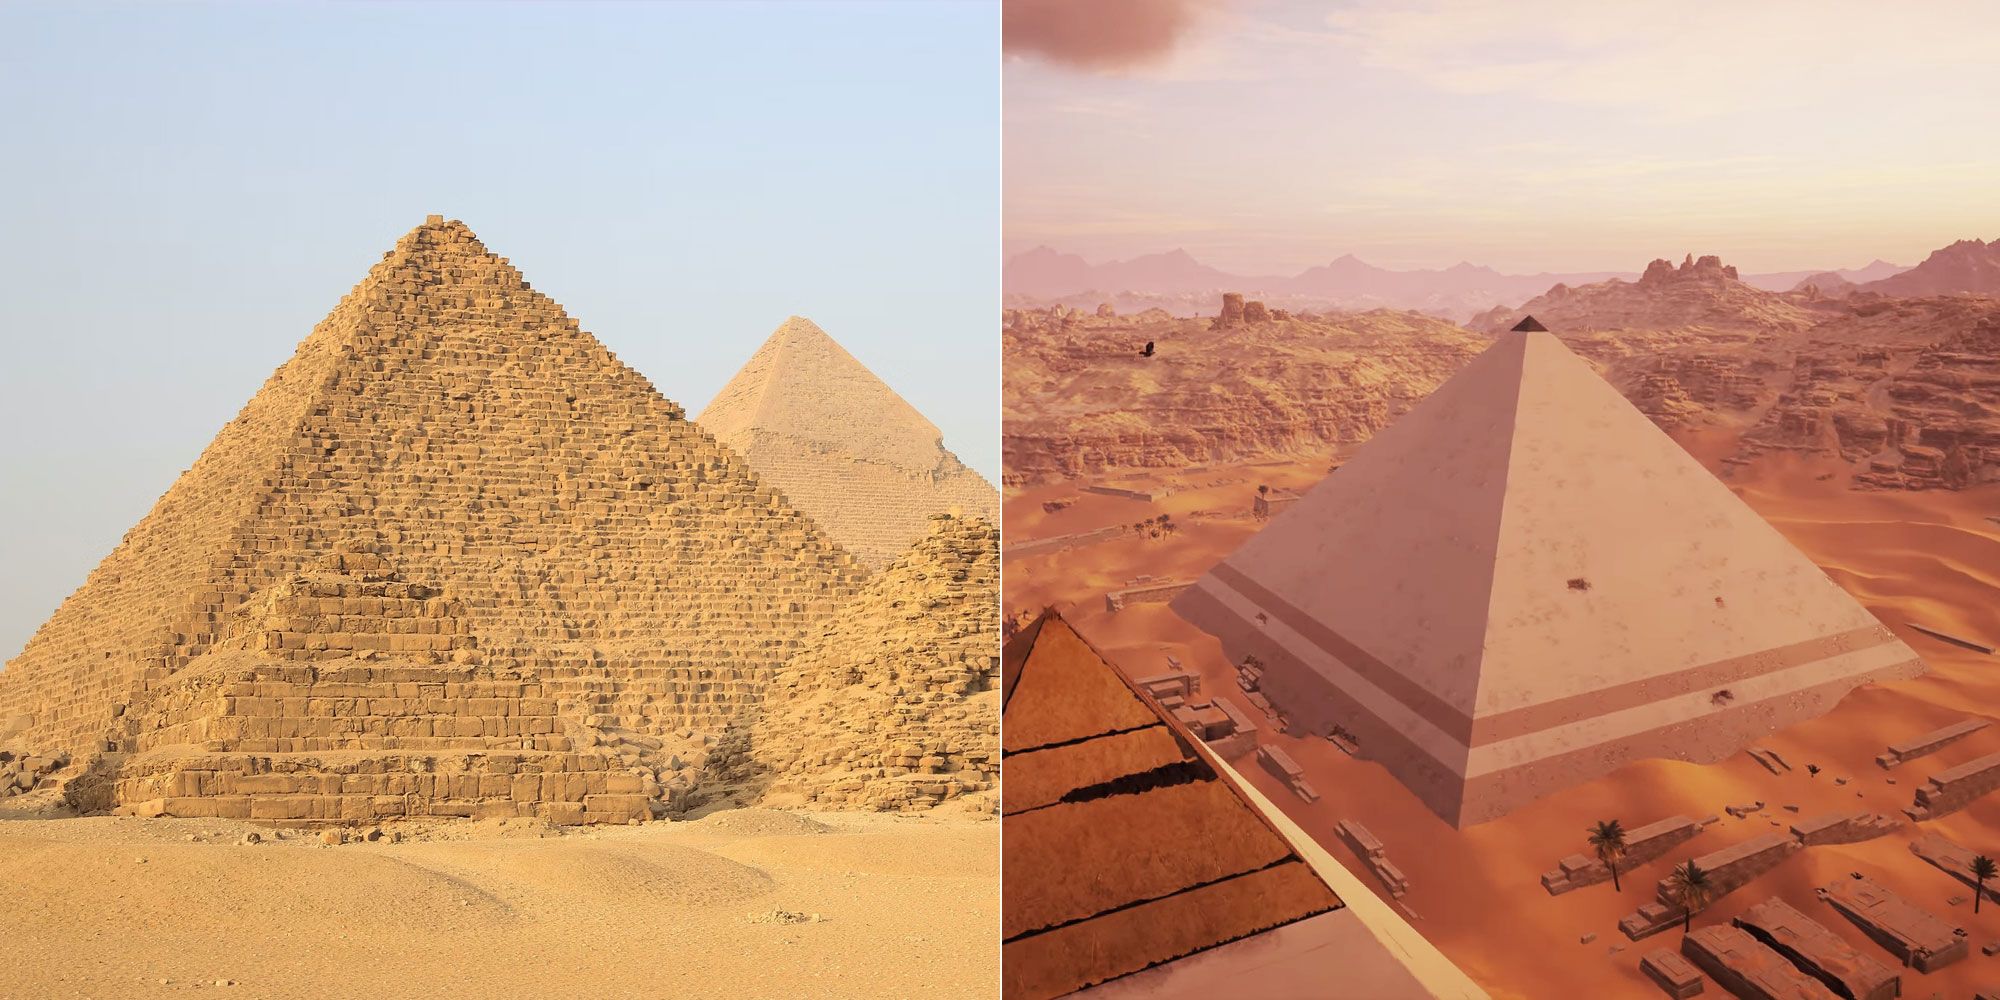 Pyramids Of Giza real world picture vs Assassins Creed.